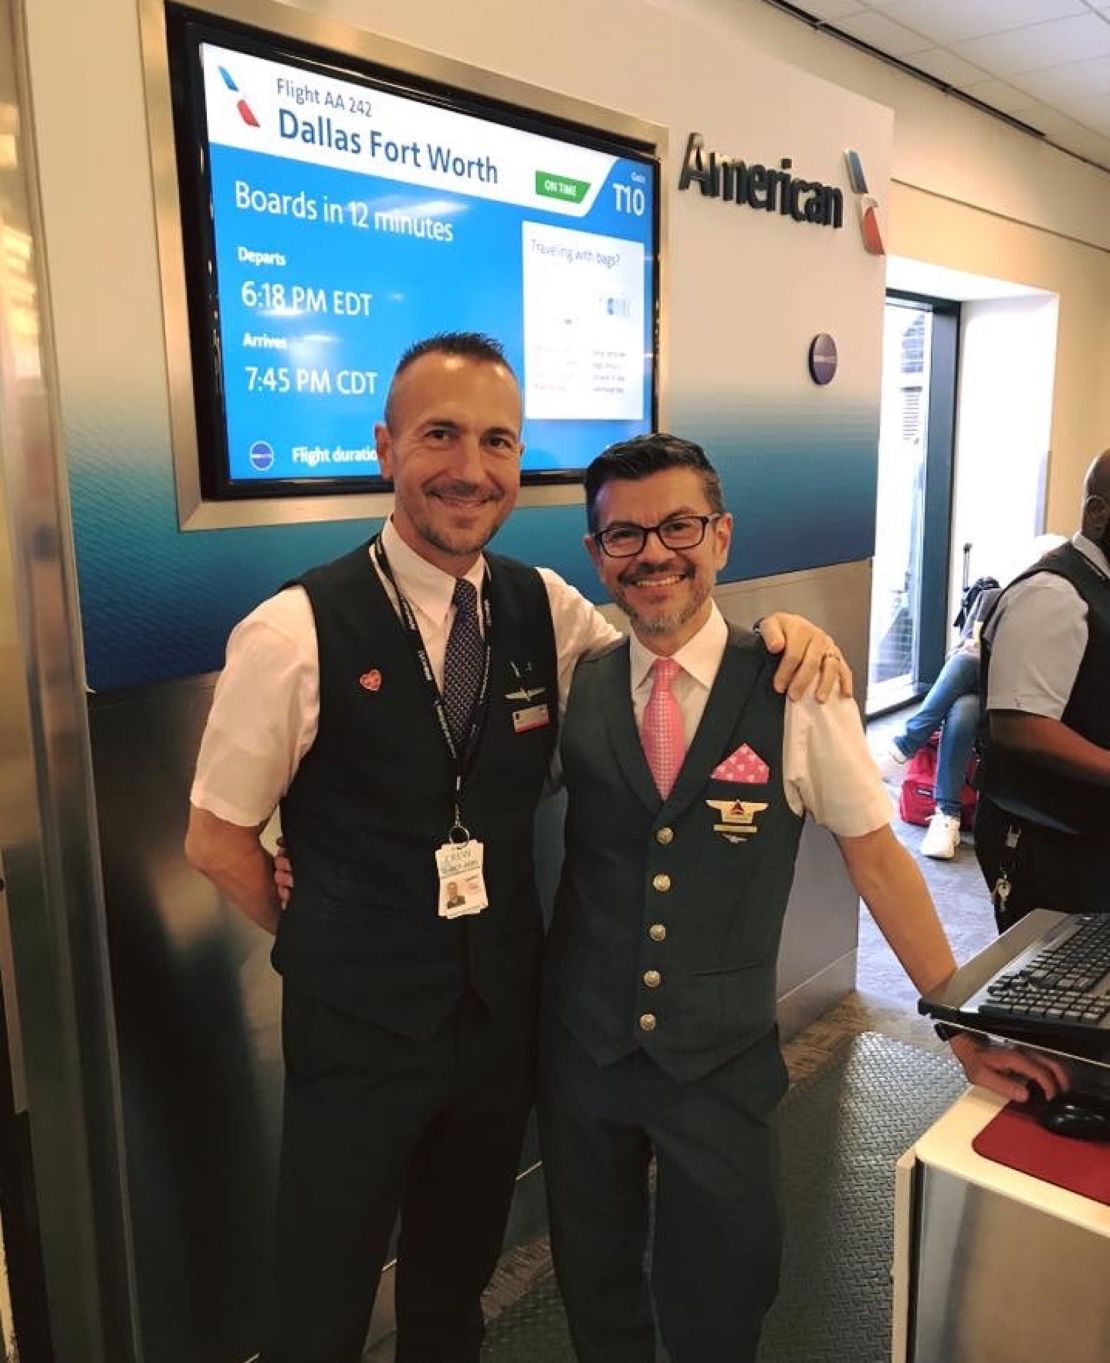 Guillermo followed in Larry's footsteps and became a flight attendant in 2018.